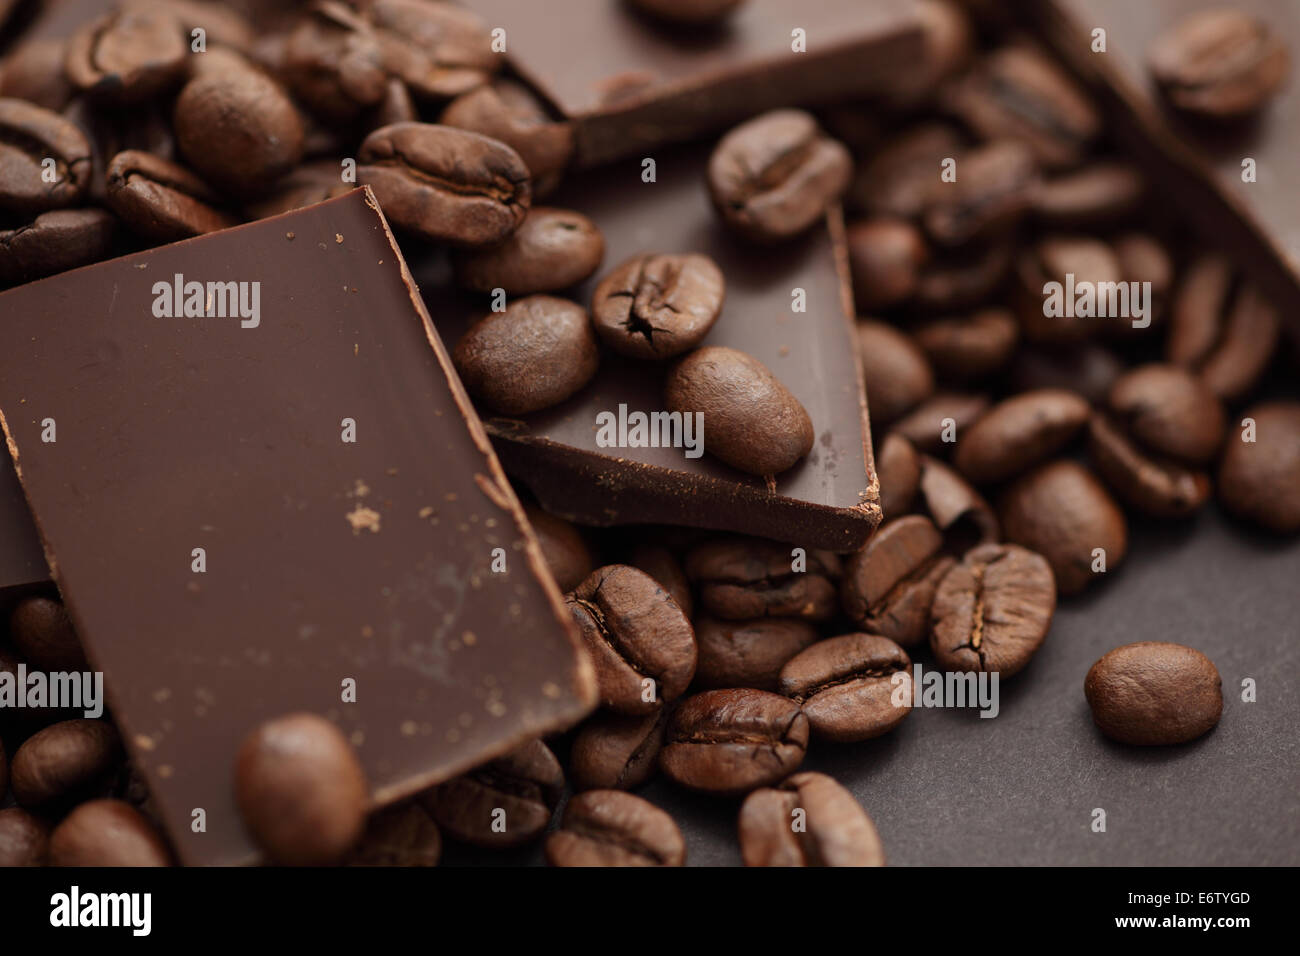 Chocolate and coffee beans close-up. Stock Photo